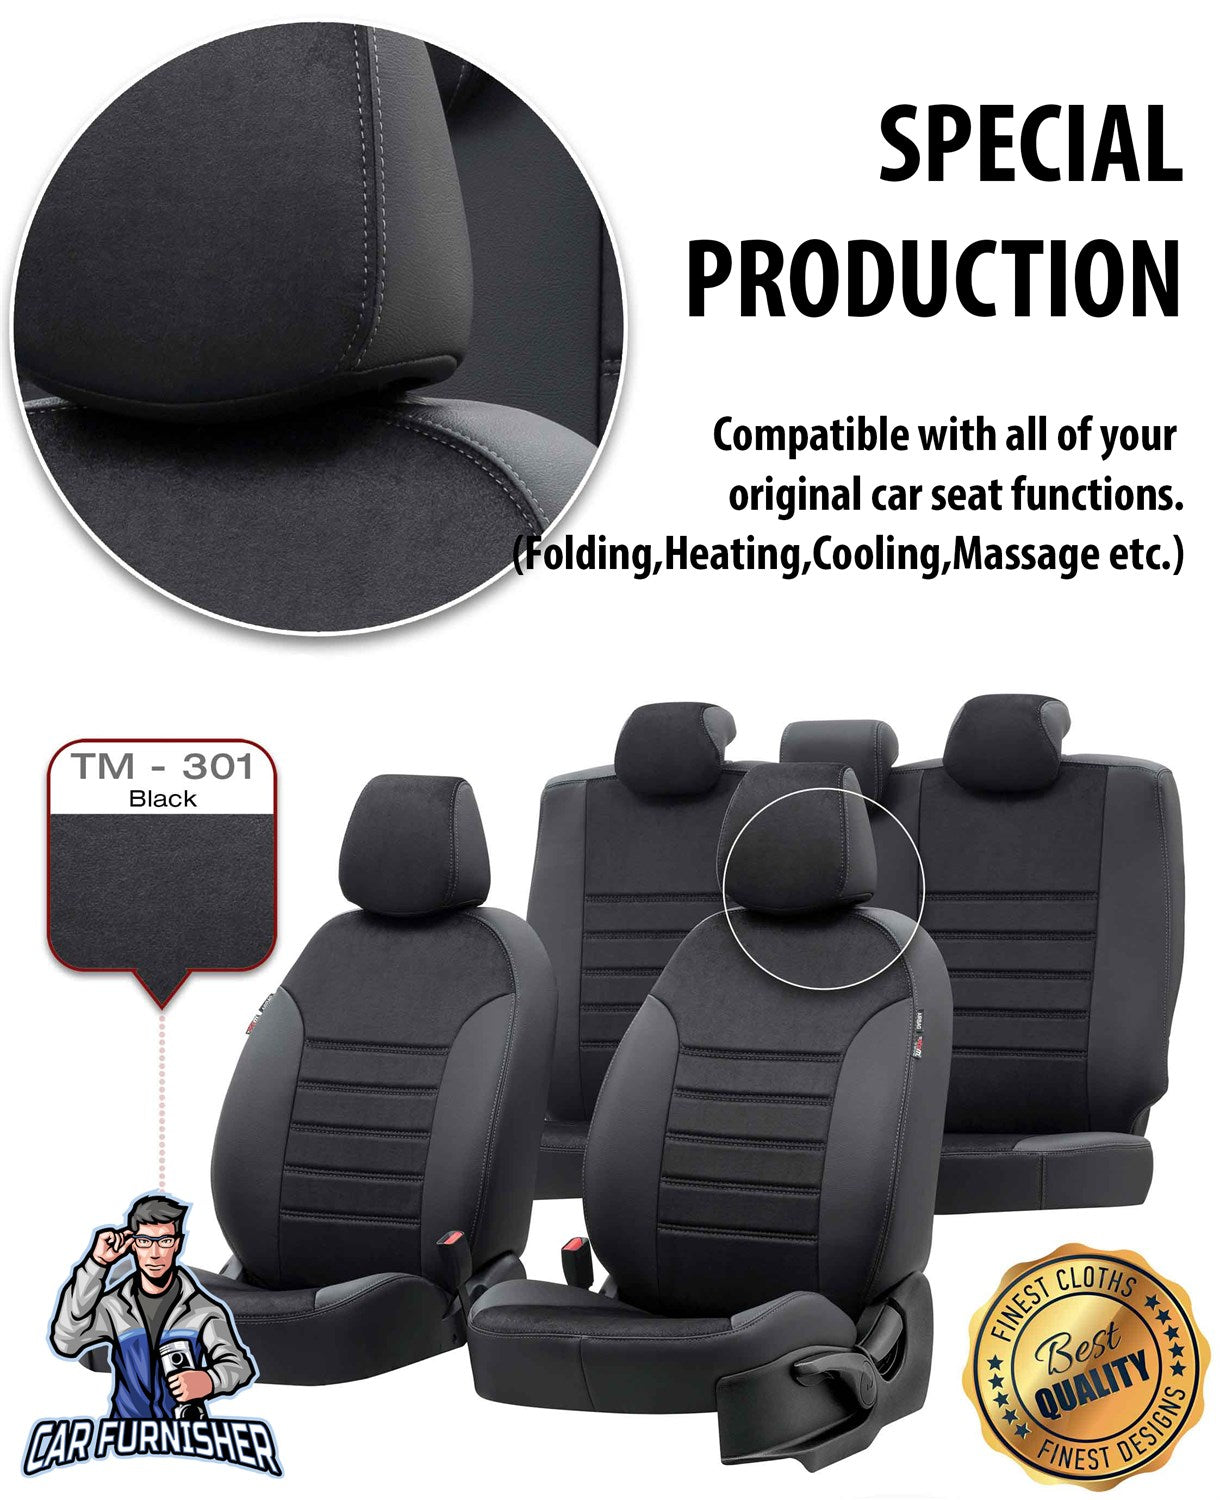 Opel Vectra Seat Covers Milano Suede Design Smoked Black Leather & Suede Fabric